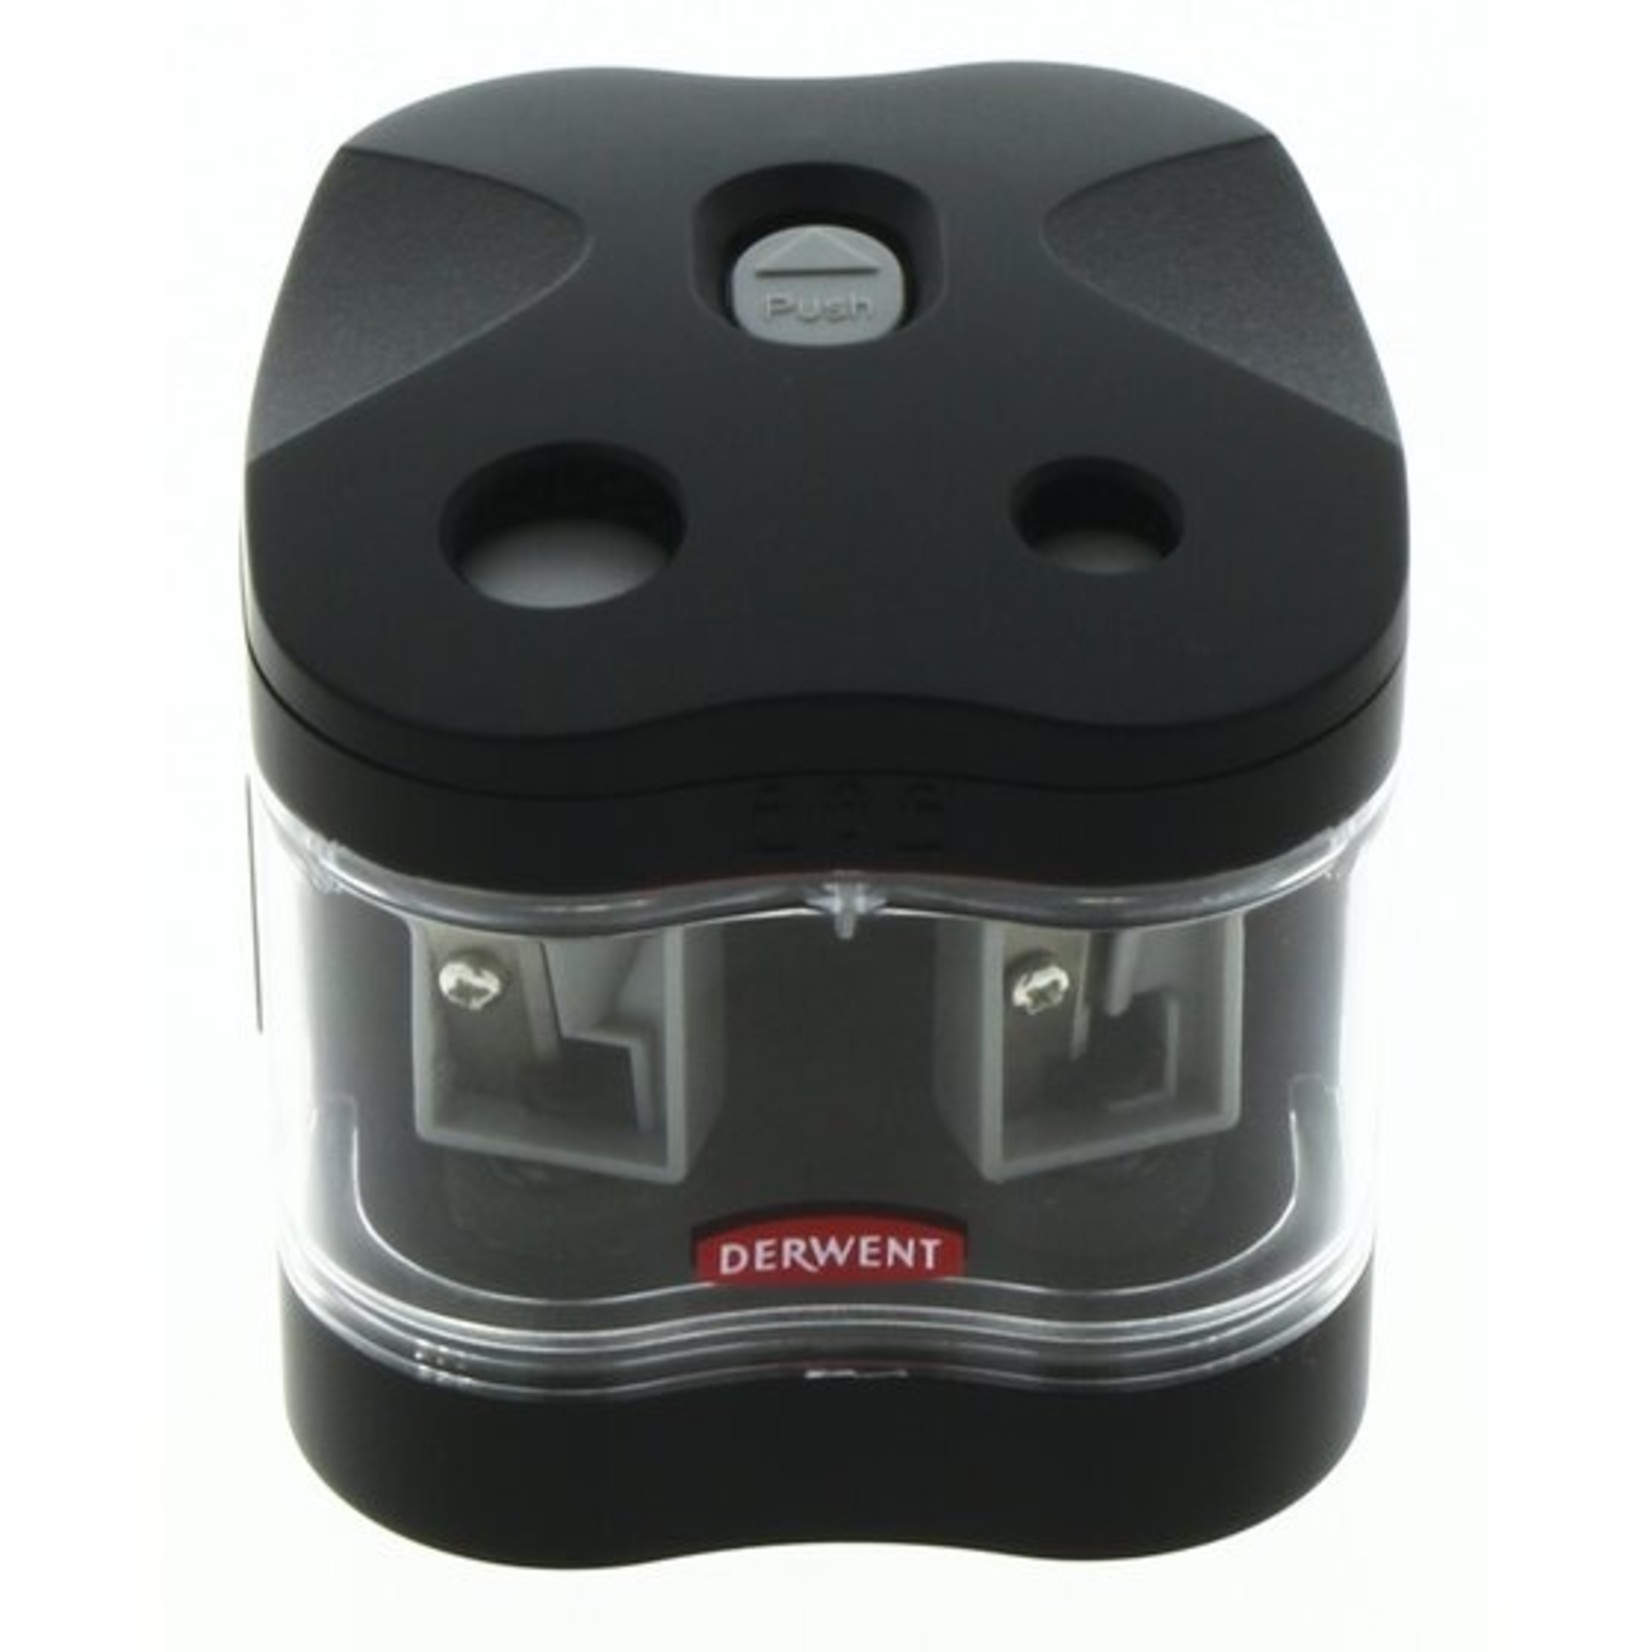 DERWENT BATTERY OPERATED TWIN HOLE PENCIL SHARPENER